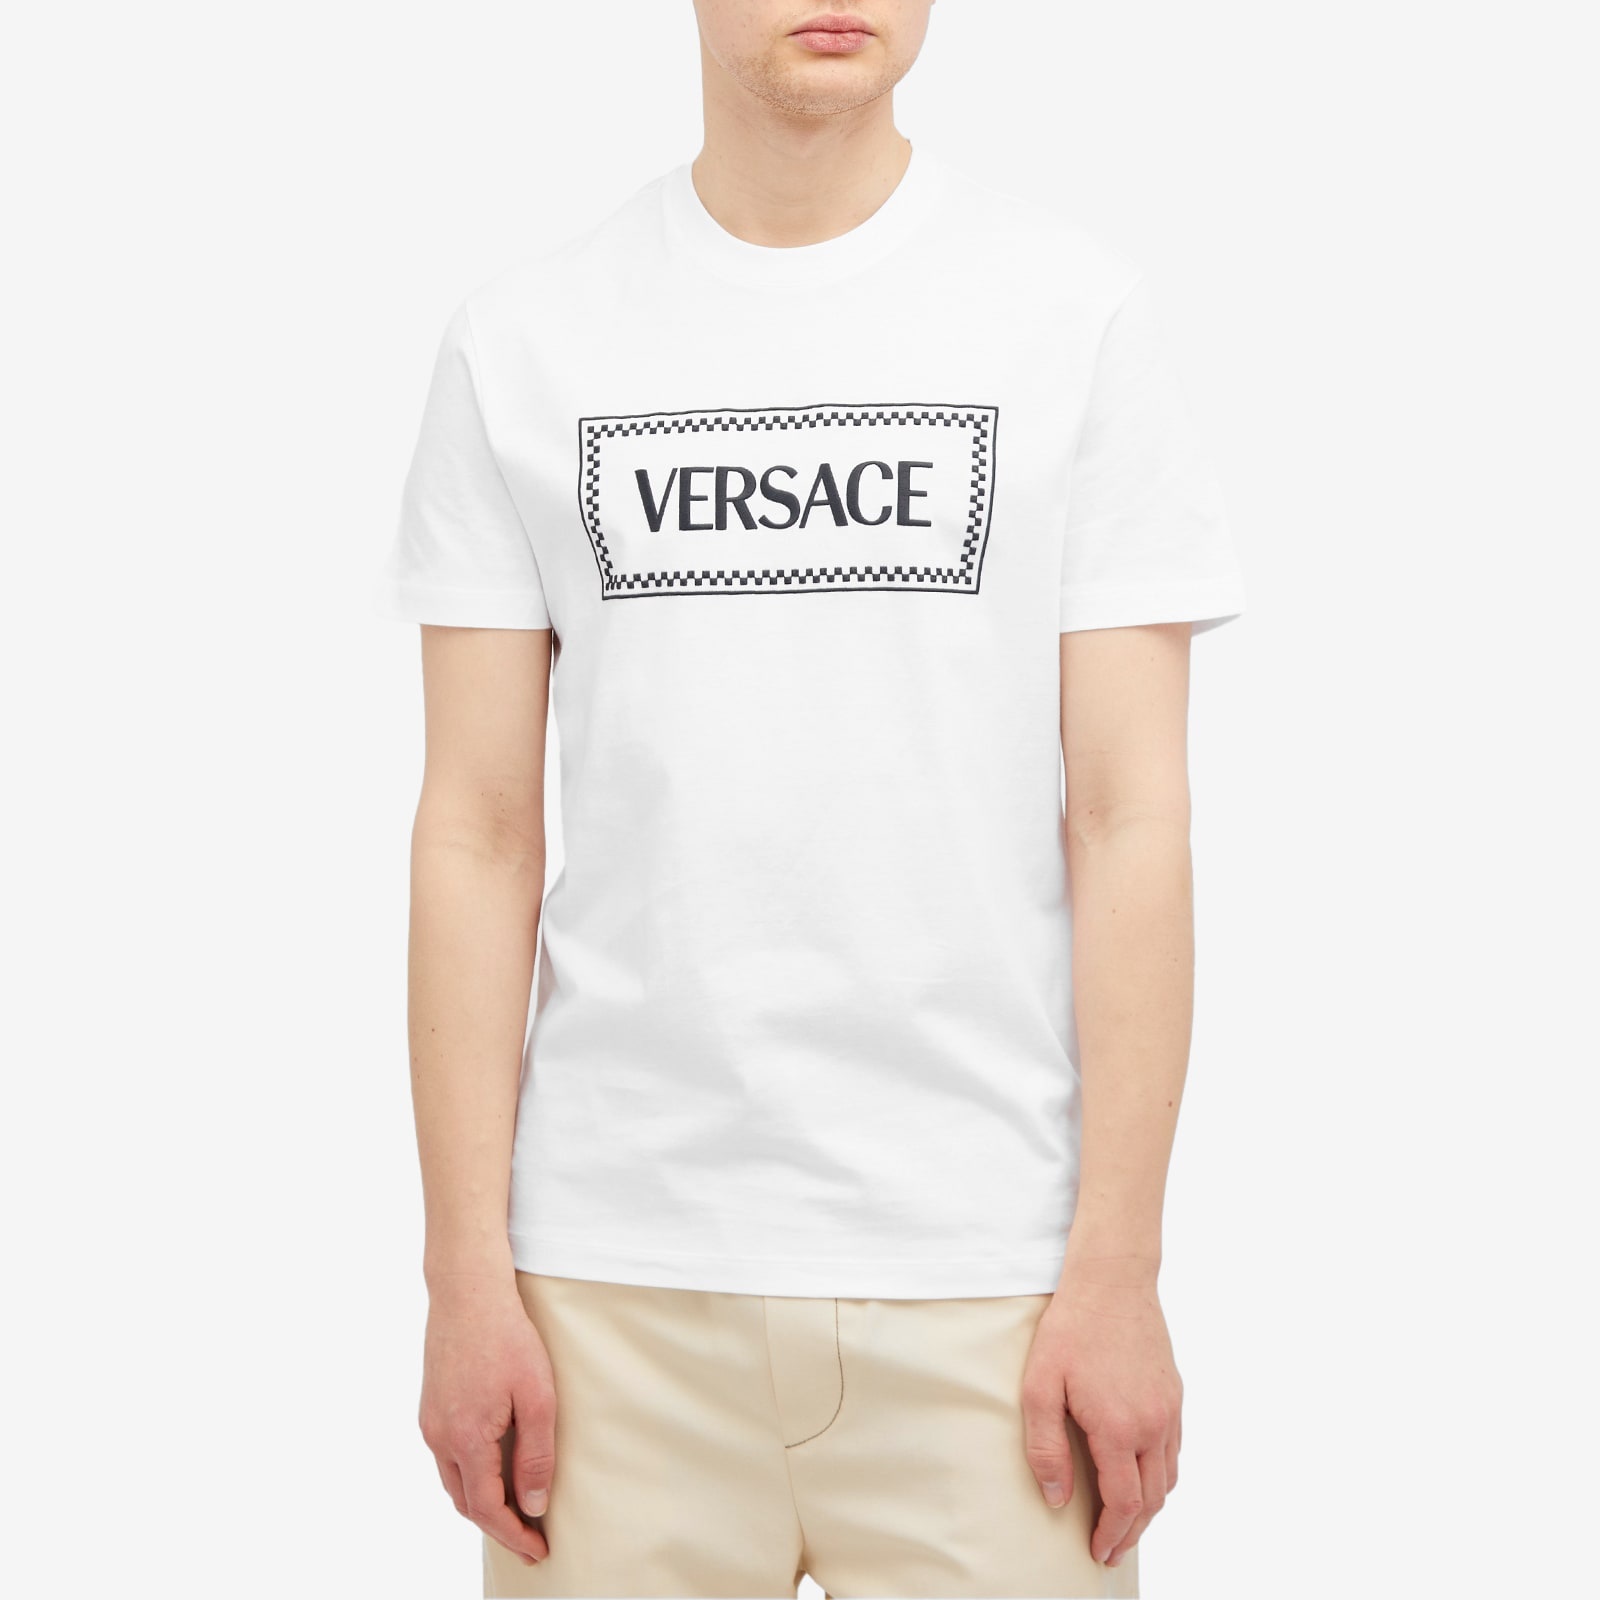 Versace Tiles Embroidered Tee - 2